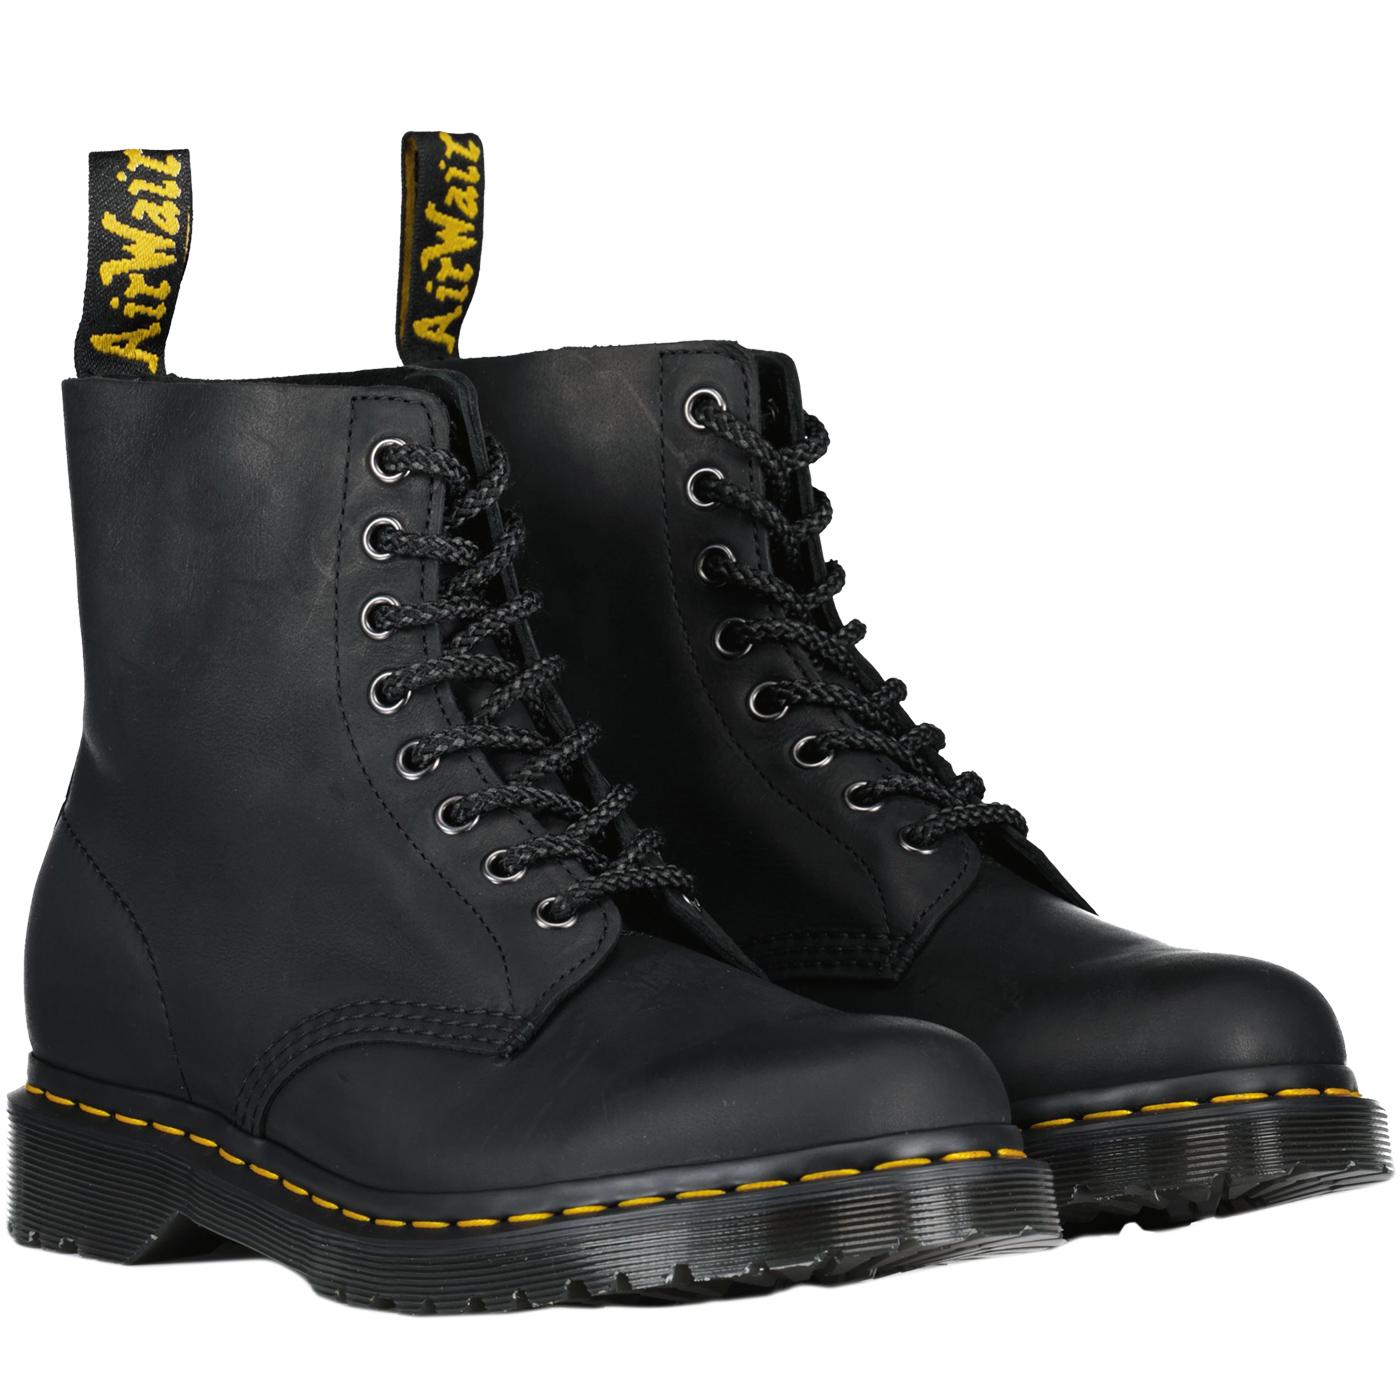 1460 Pascal Dr Martens Waxed Full Grain Boots in Black